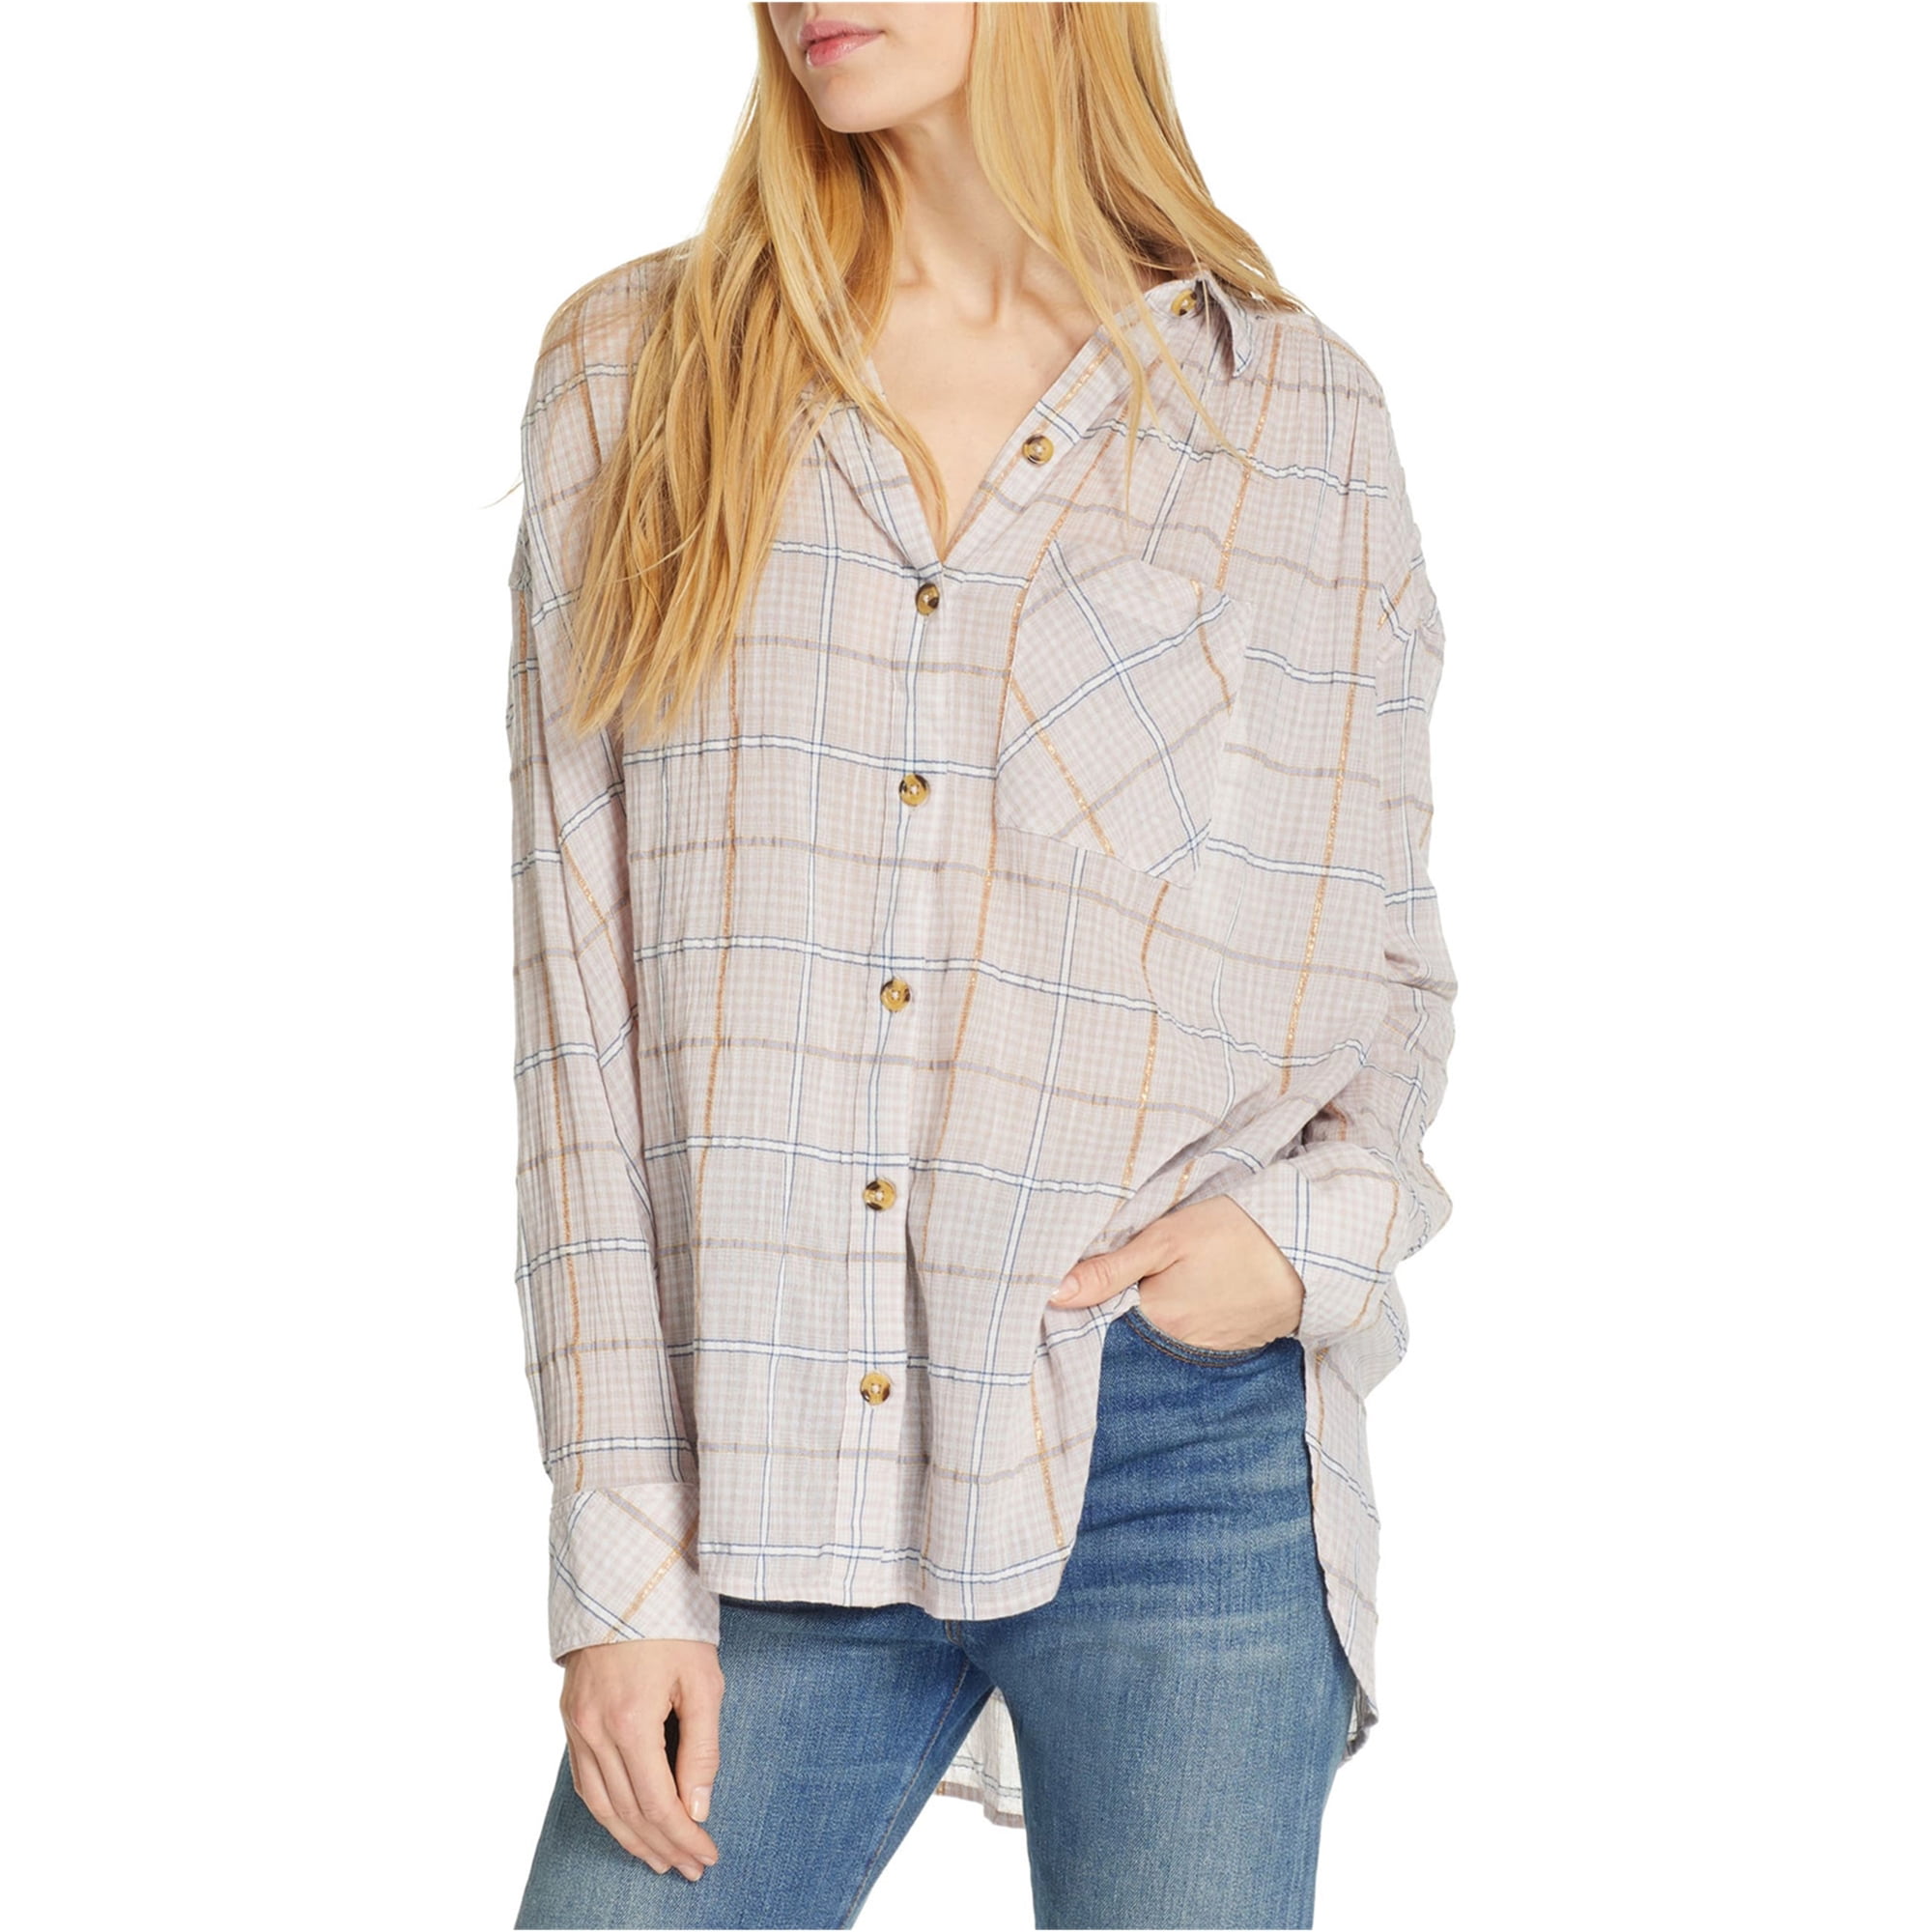 FREE PEOPLE Break My Stride Button Up Shirt OB857288 Size Large factory ...